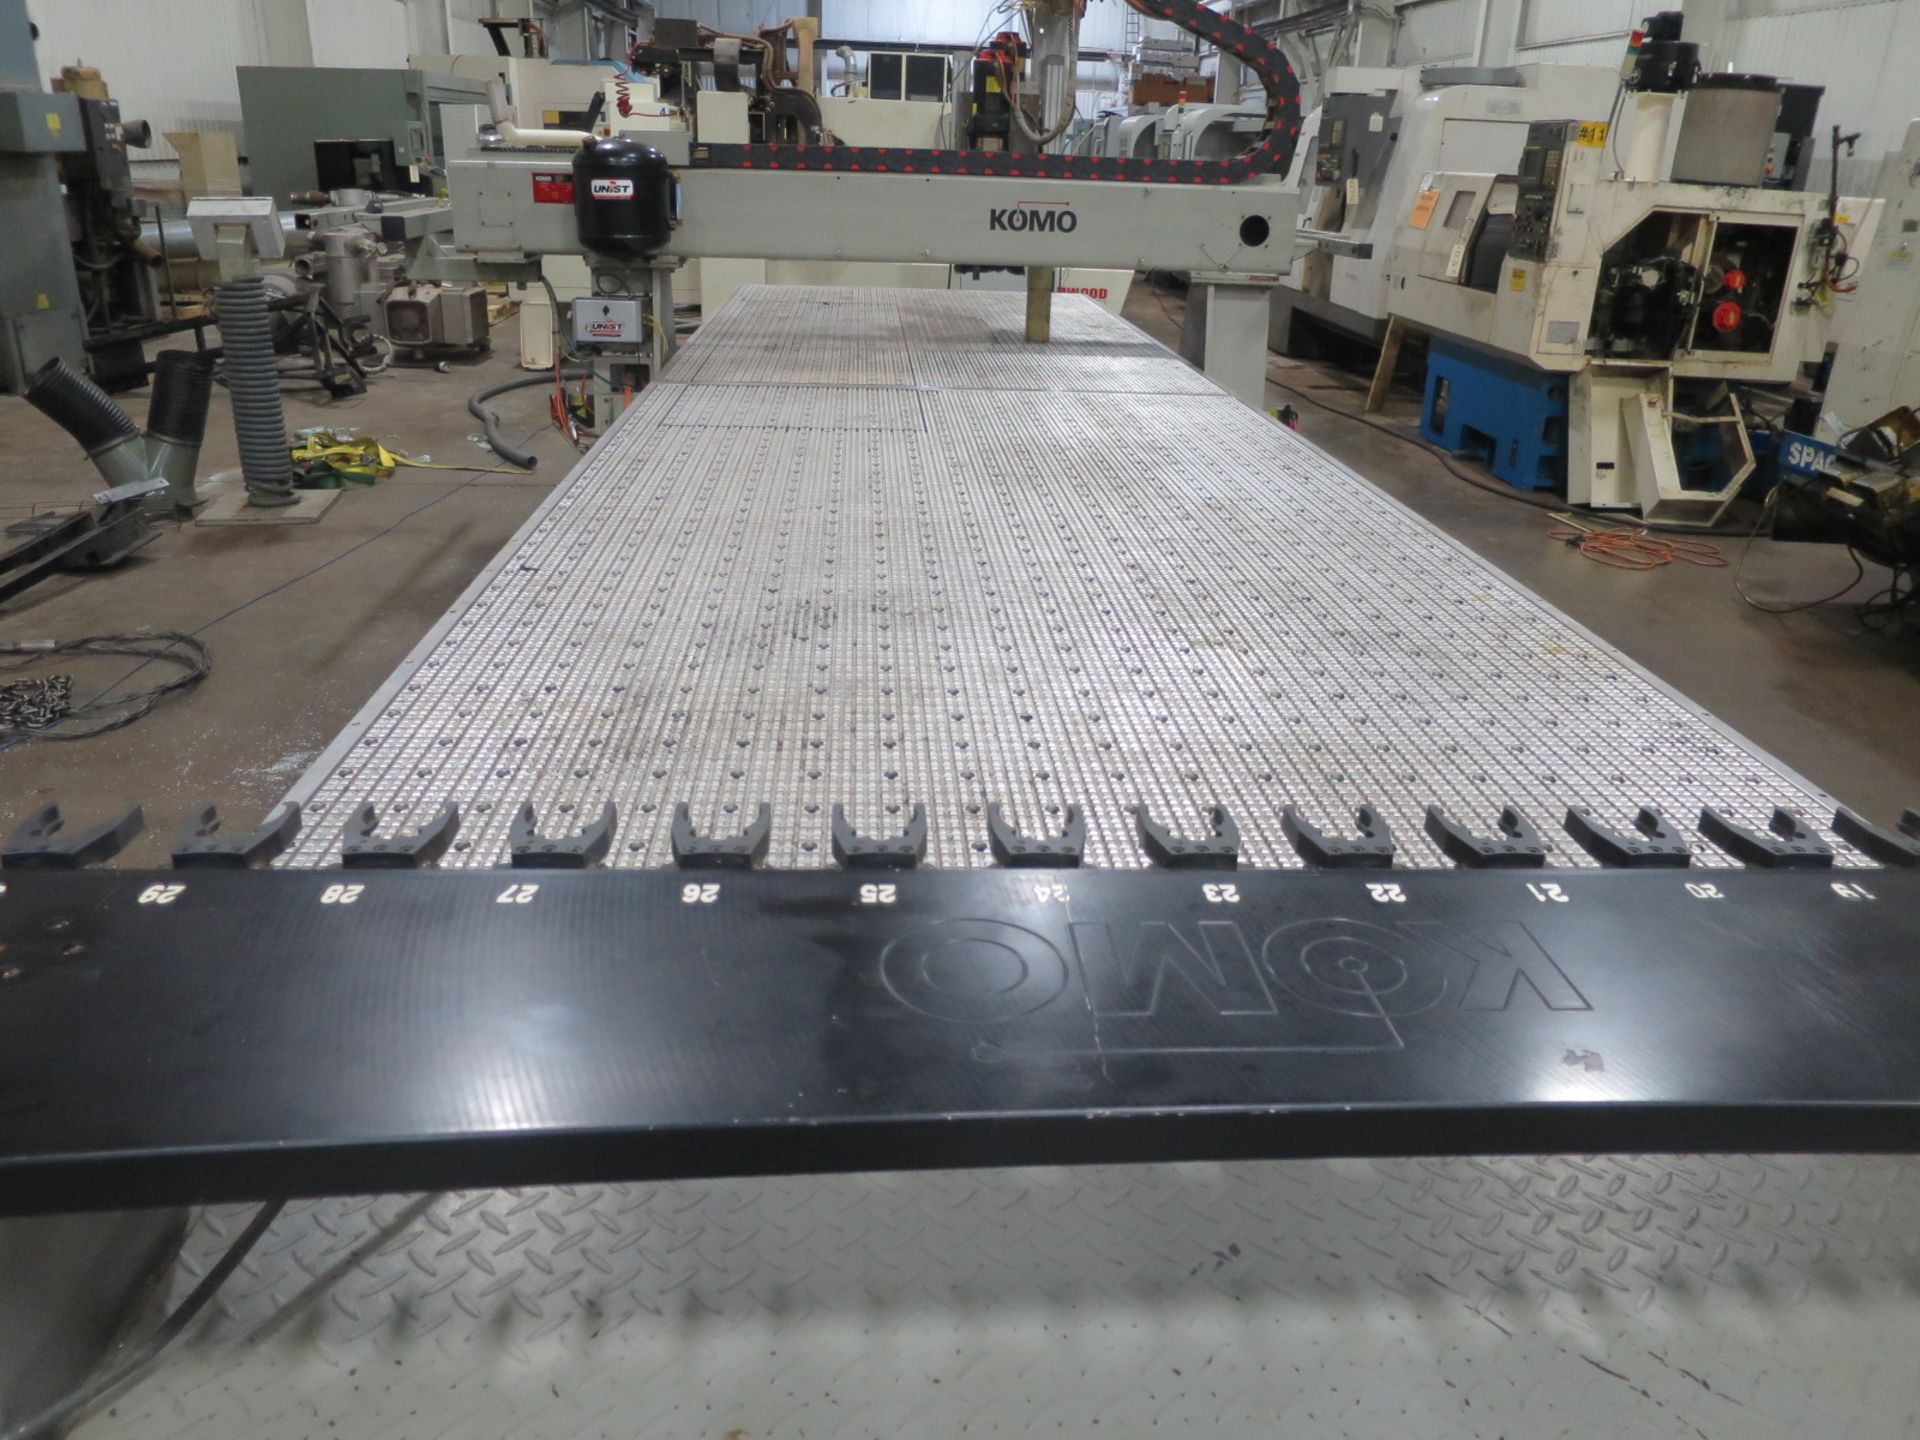 72"x280" Komo Mach One GT 636 CNC large Format Router, S/N 12178, New 2010 - Image 6 of 12